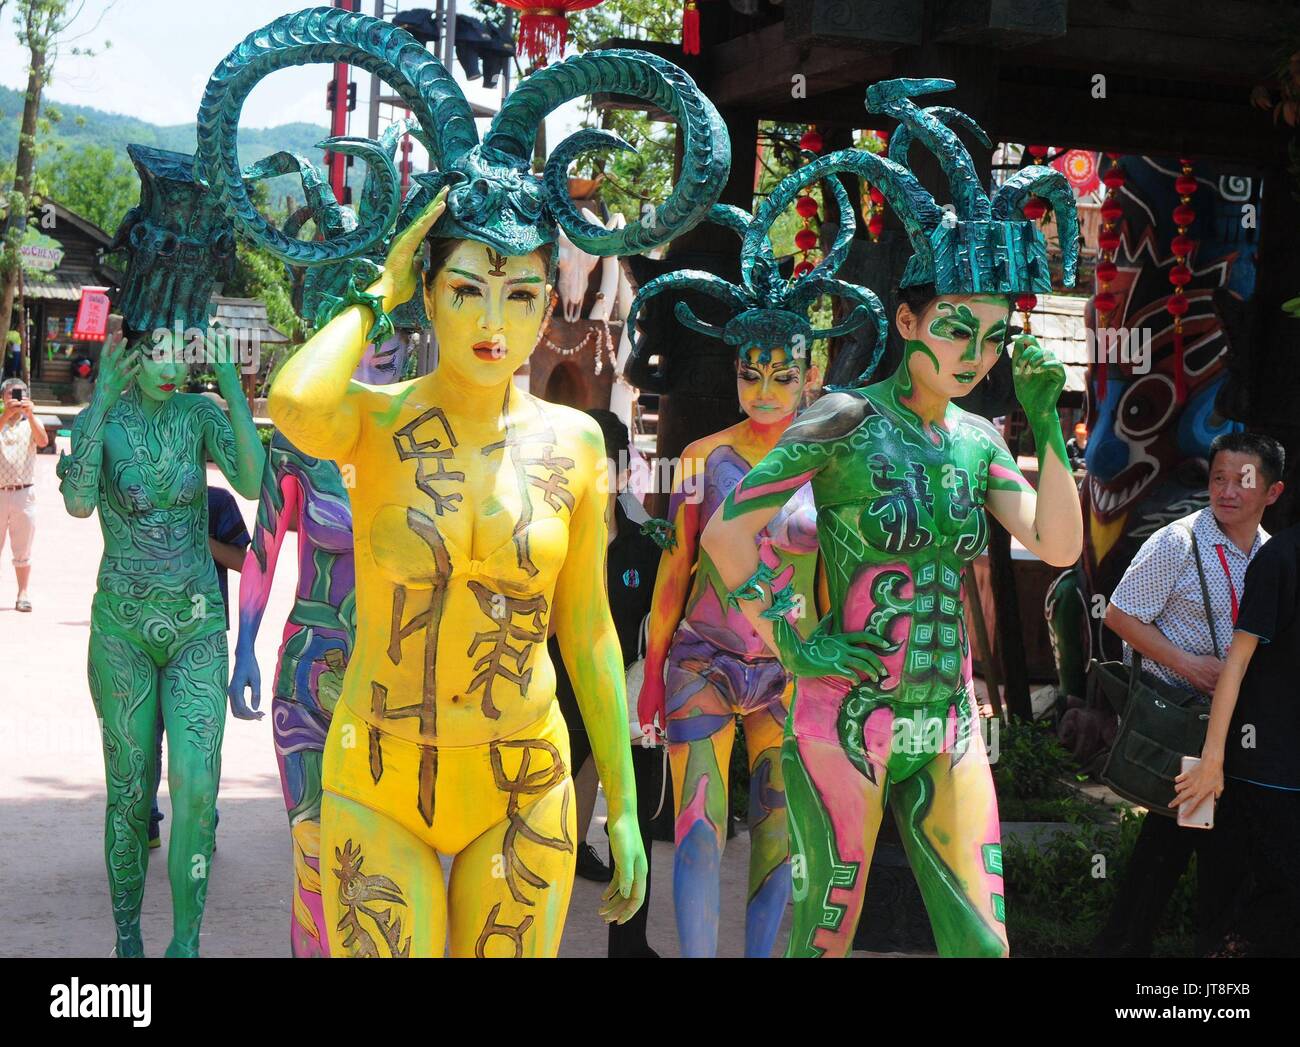 Changsha, Changsha, China. 7th Aug, 2017. Hunan, CHINA-August 7 2017: (EDITORIAL USE ONLY. CHINA OUT) The body painting of Four-goat Square Zun can be seen during the dance performance in Changsha, central China's Hunan Province, August 7th, 2017. The Four-goat Square Zun is an ancient Chinese ritual bronze zun vessel. It is more than 3,000 years old from the era of late Shang dynasty (11th-10th century BC), and famous for its shape, each of the four sides of the belly has a big horn-curled goat. It was unearthed in Huangcai Town, Ningxiang County in Hunan Province, and is exhibited at the Stock Photo